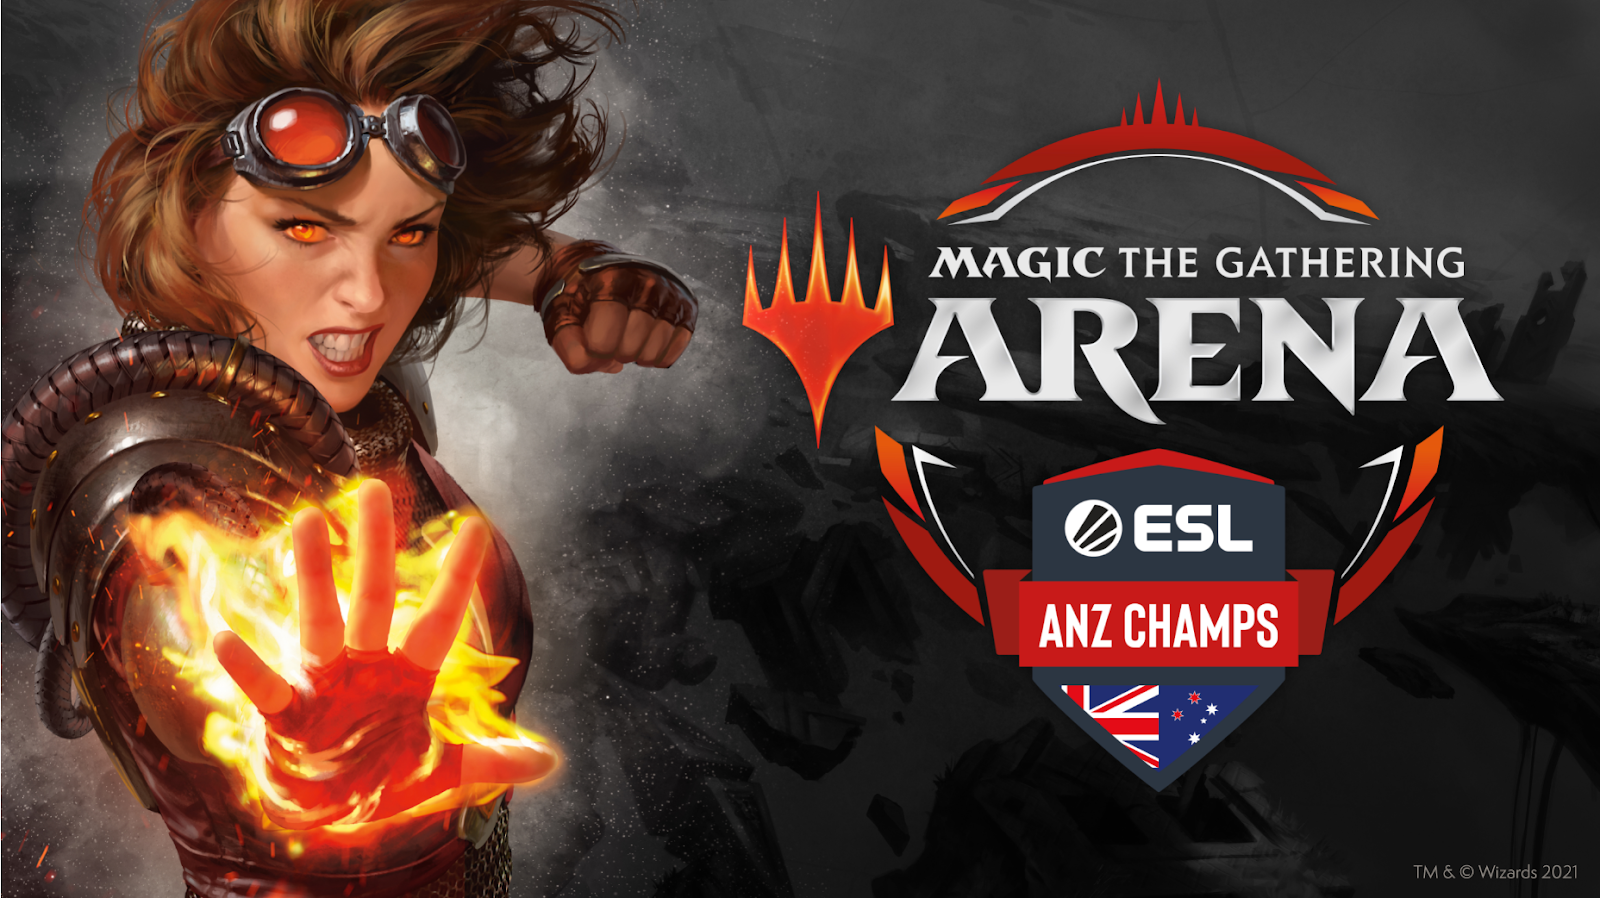 First Two Seasons of Magic: The Gathering Arena ESL ANZ Champs Announced